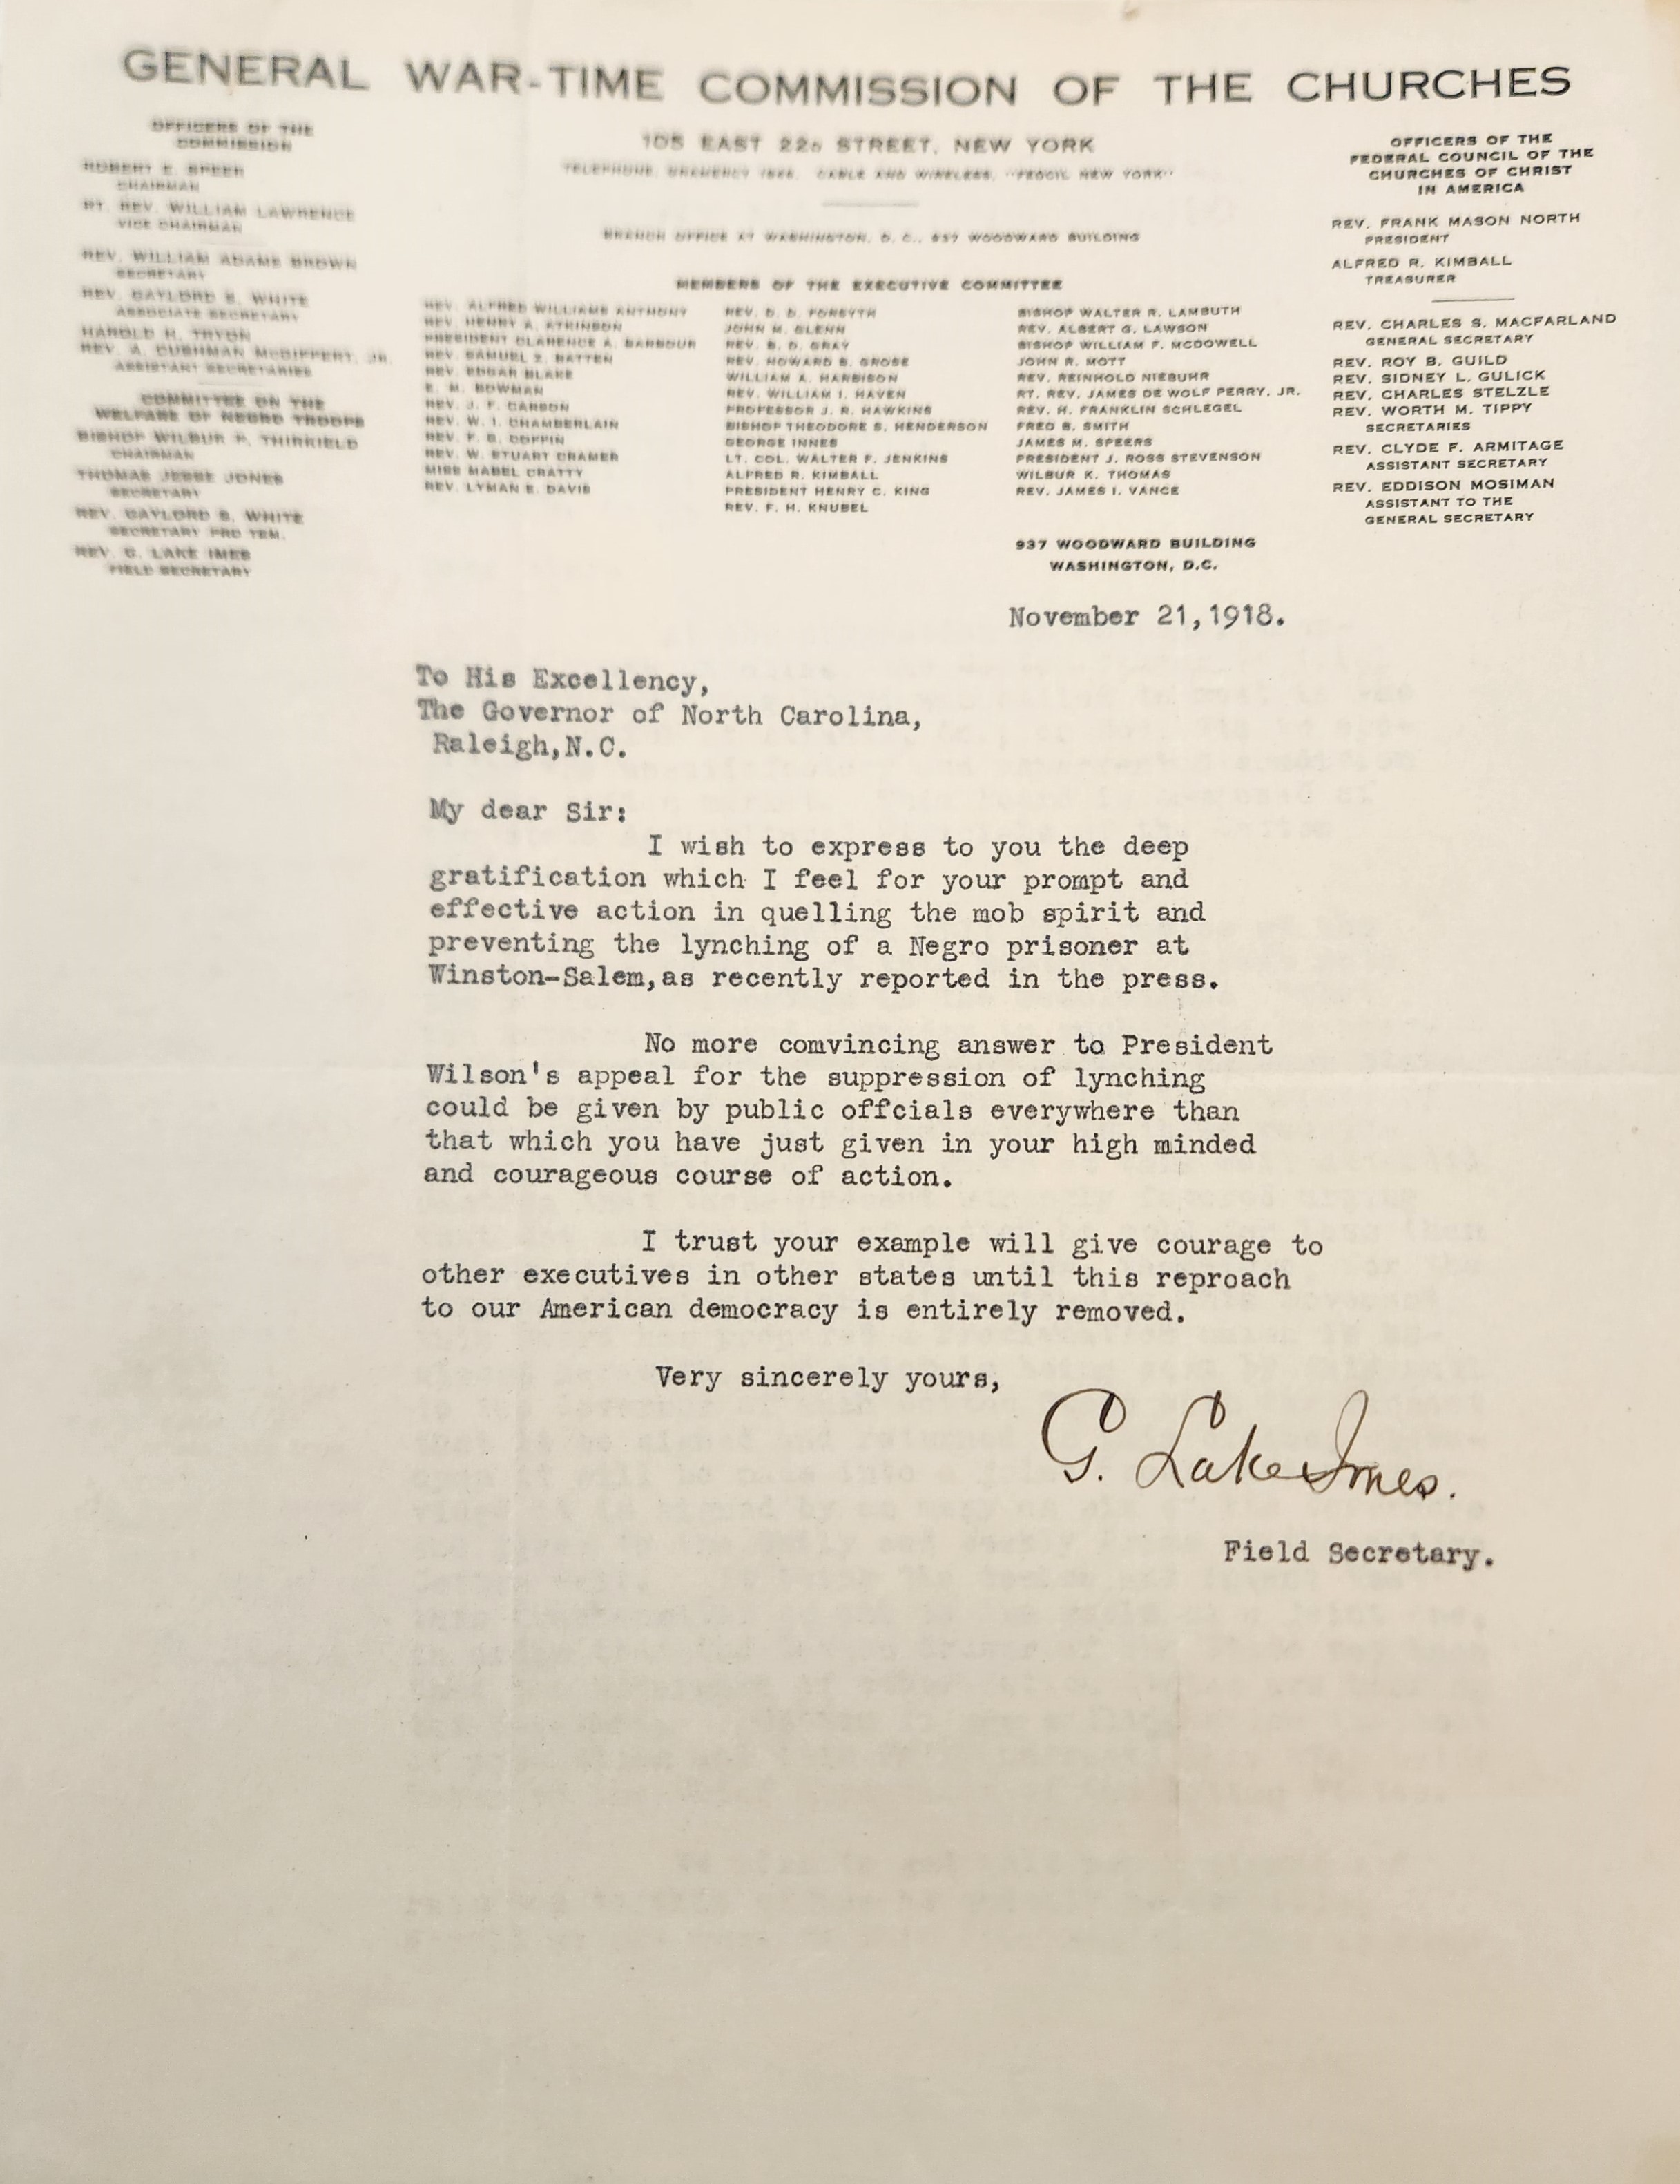 Letter from Imes to Bickett, November 21, 1918